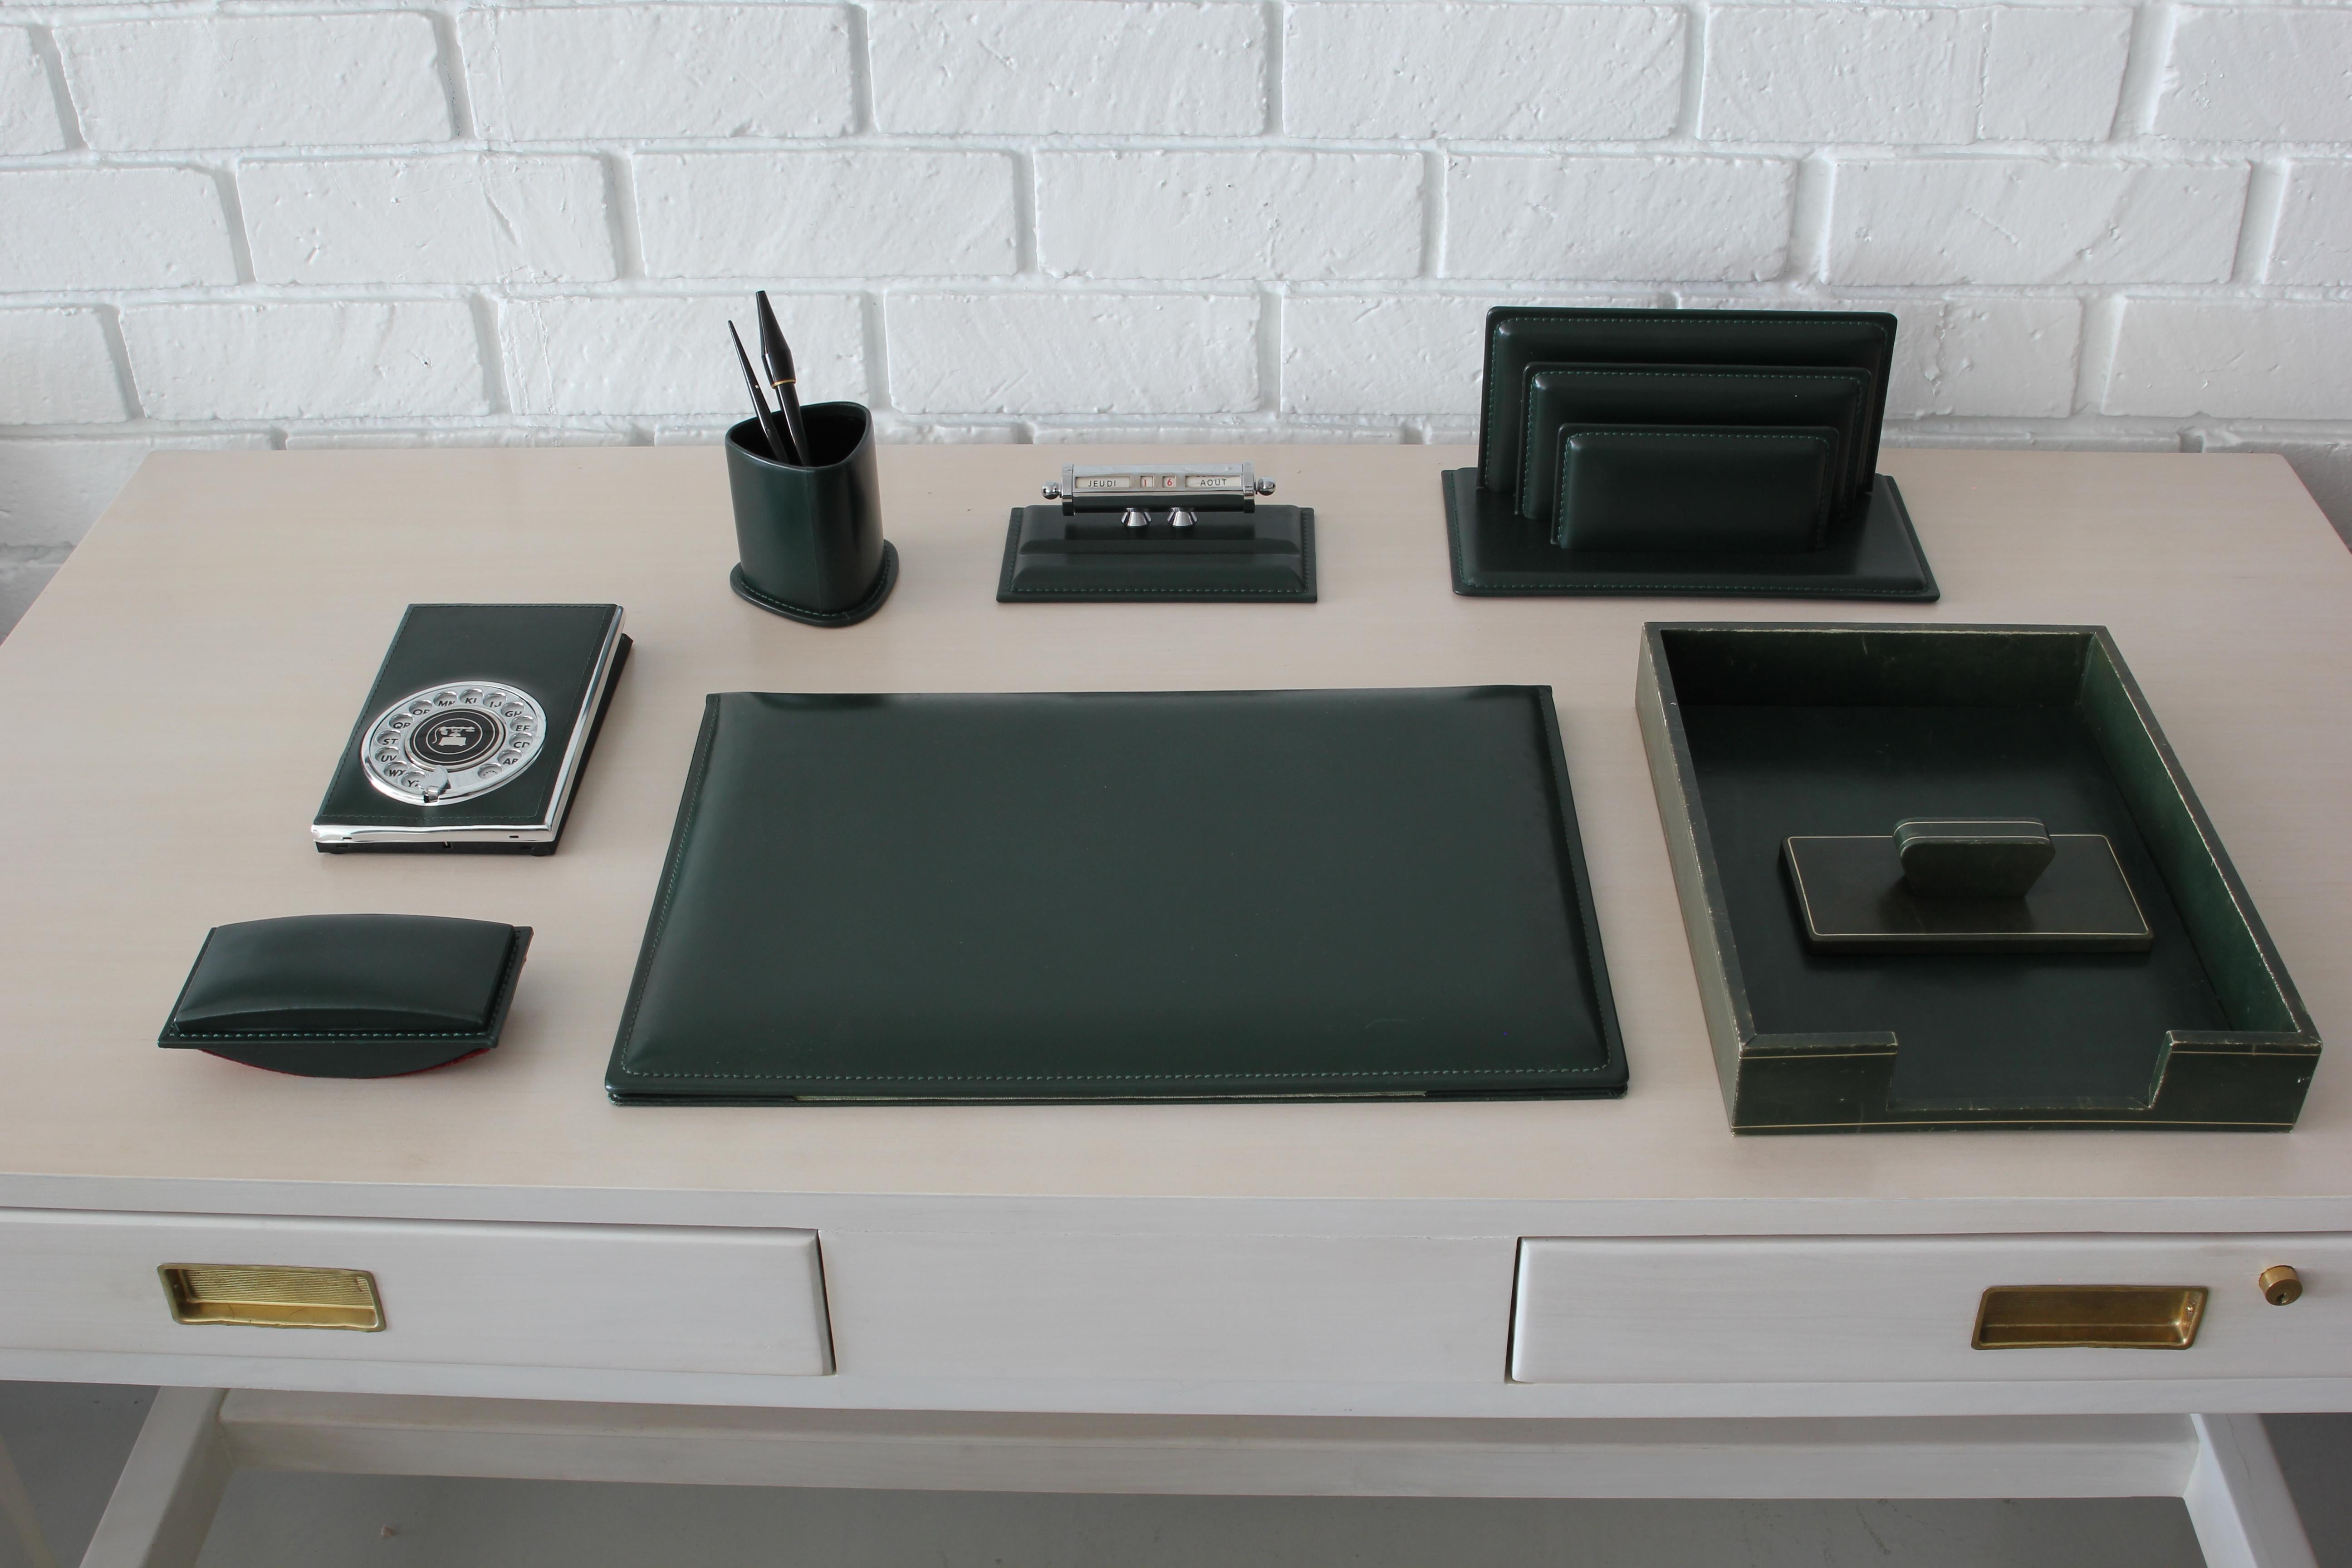 Full French leather desk set in the style of Jacques Adnet.
Dark hunger green leather set includes seven pieces - including paper tray, envelope mail holder, calendar, blotter, pen holder and old fashioned rotary telephone book!
Excellent vintage